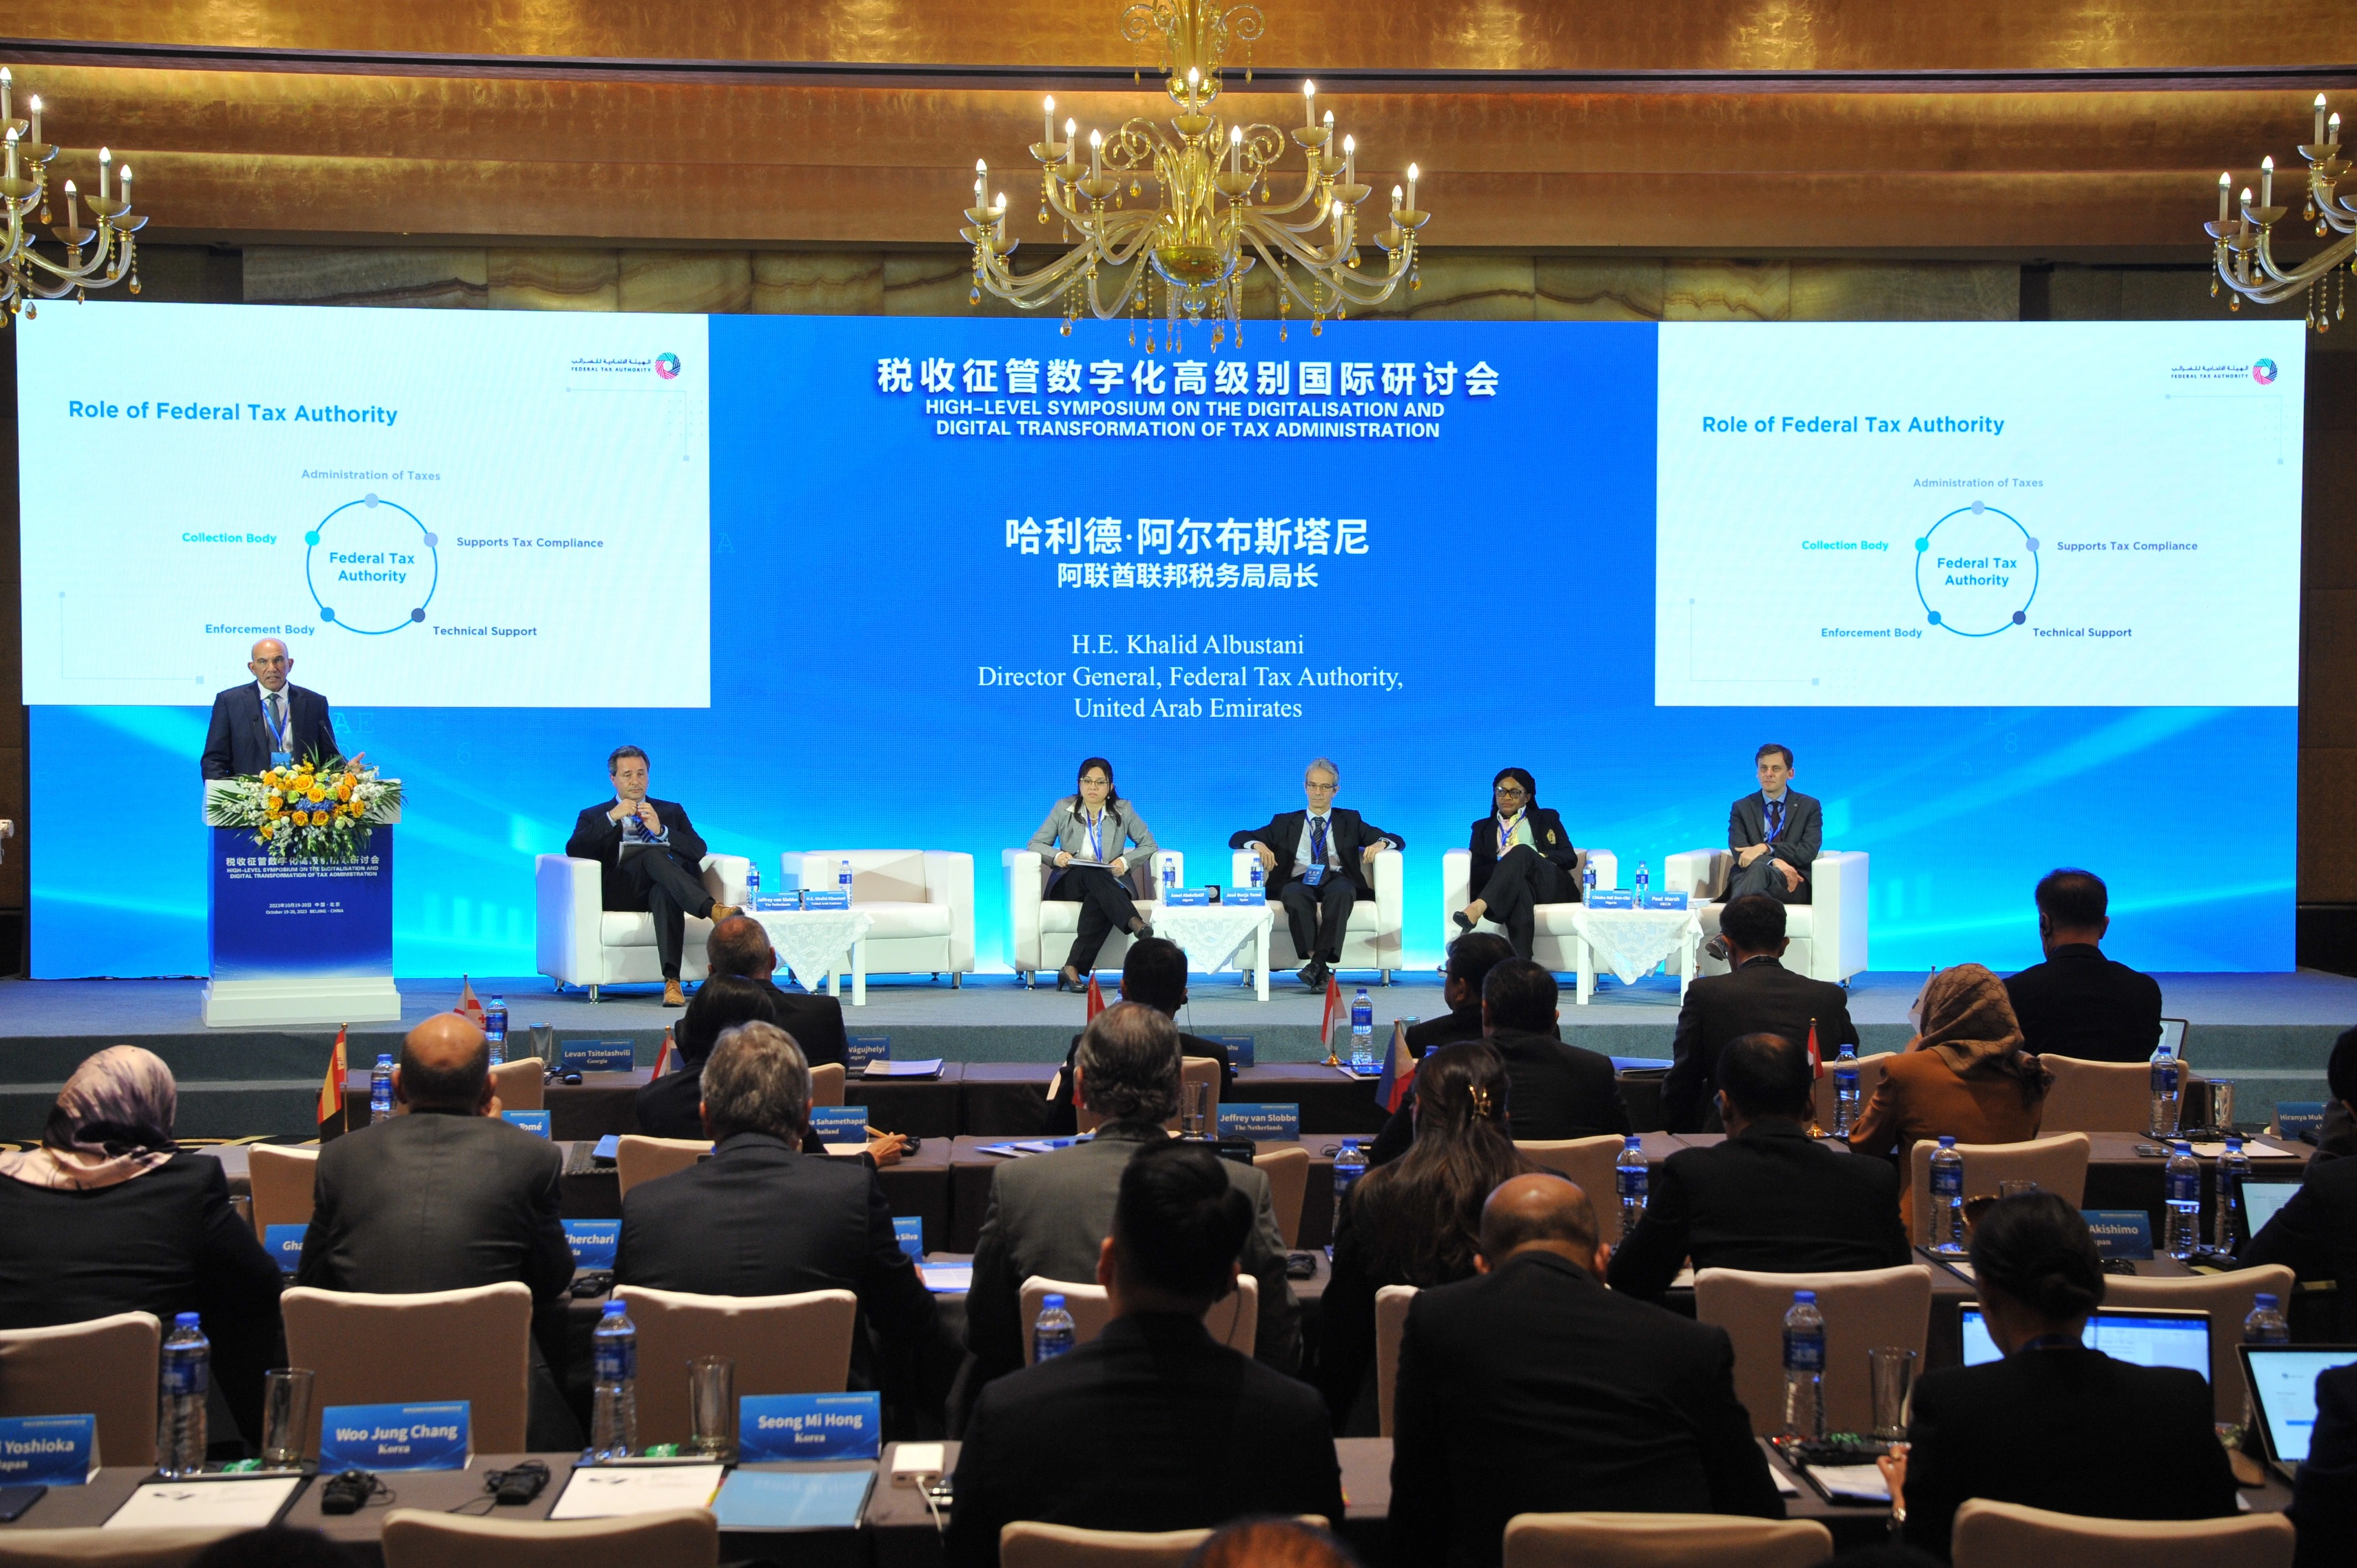 Federal Tax Authority joins ‘Digitalisation and Digital Transformation of Tax Administrations’ seminar in Beijing